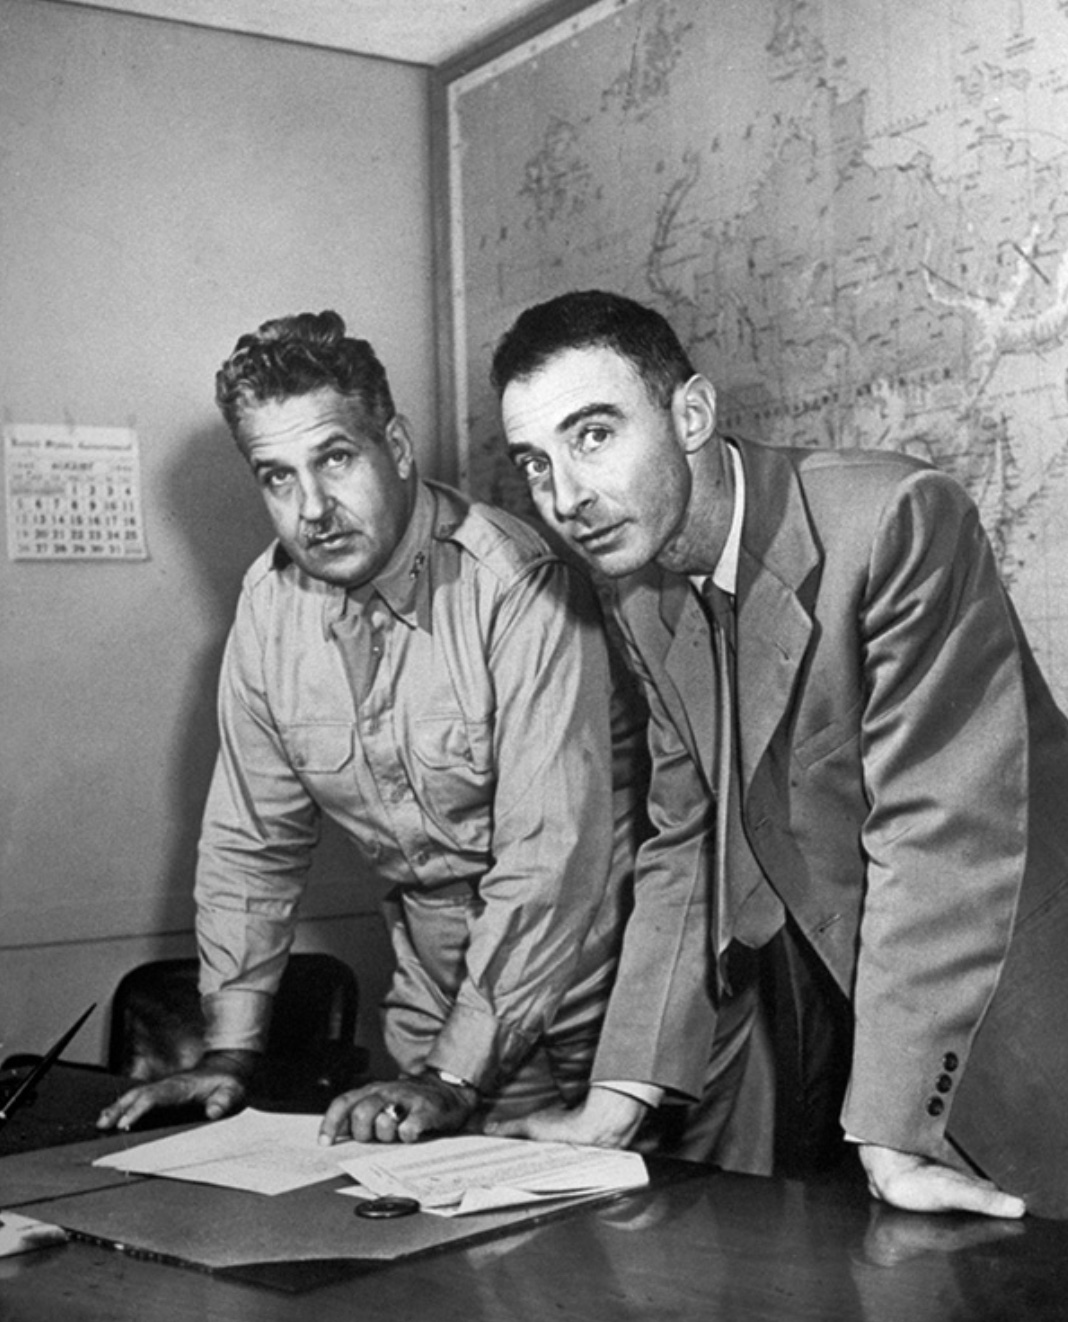 Two men in a vintage office, one leaning on a desk and the other standing, both looking towards the camera with a world map in the background.